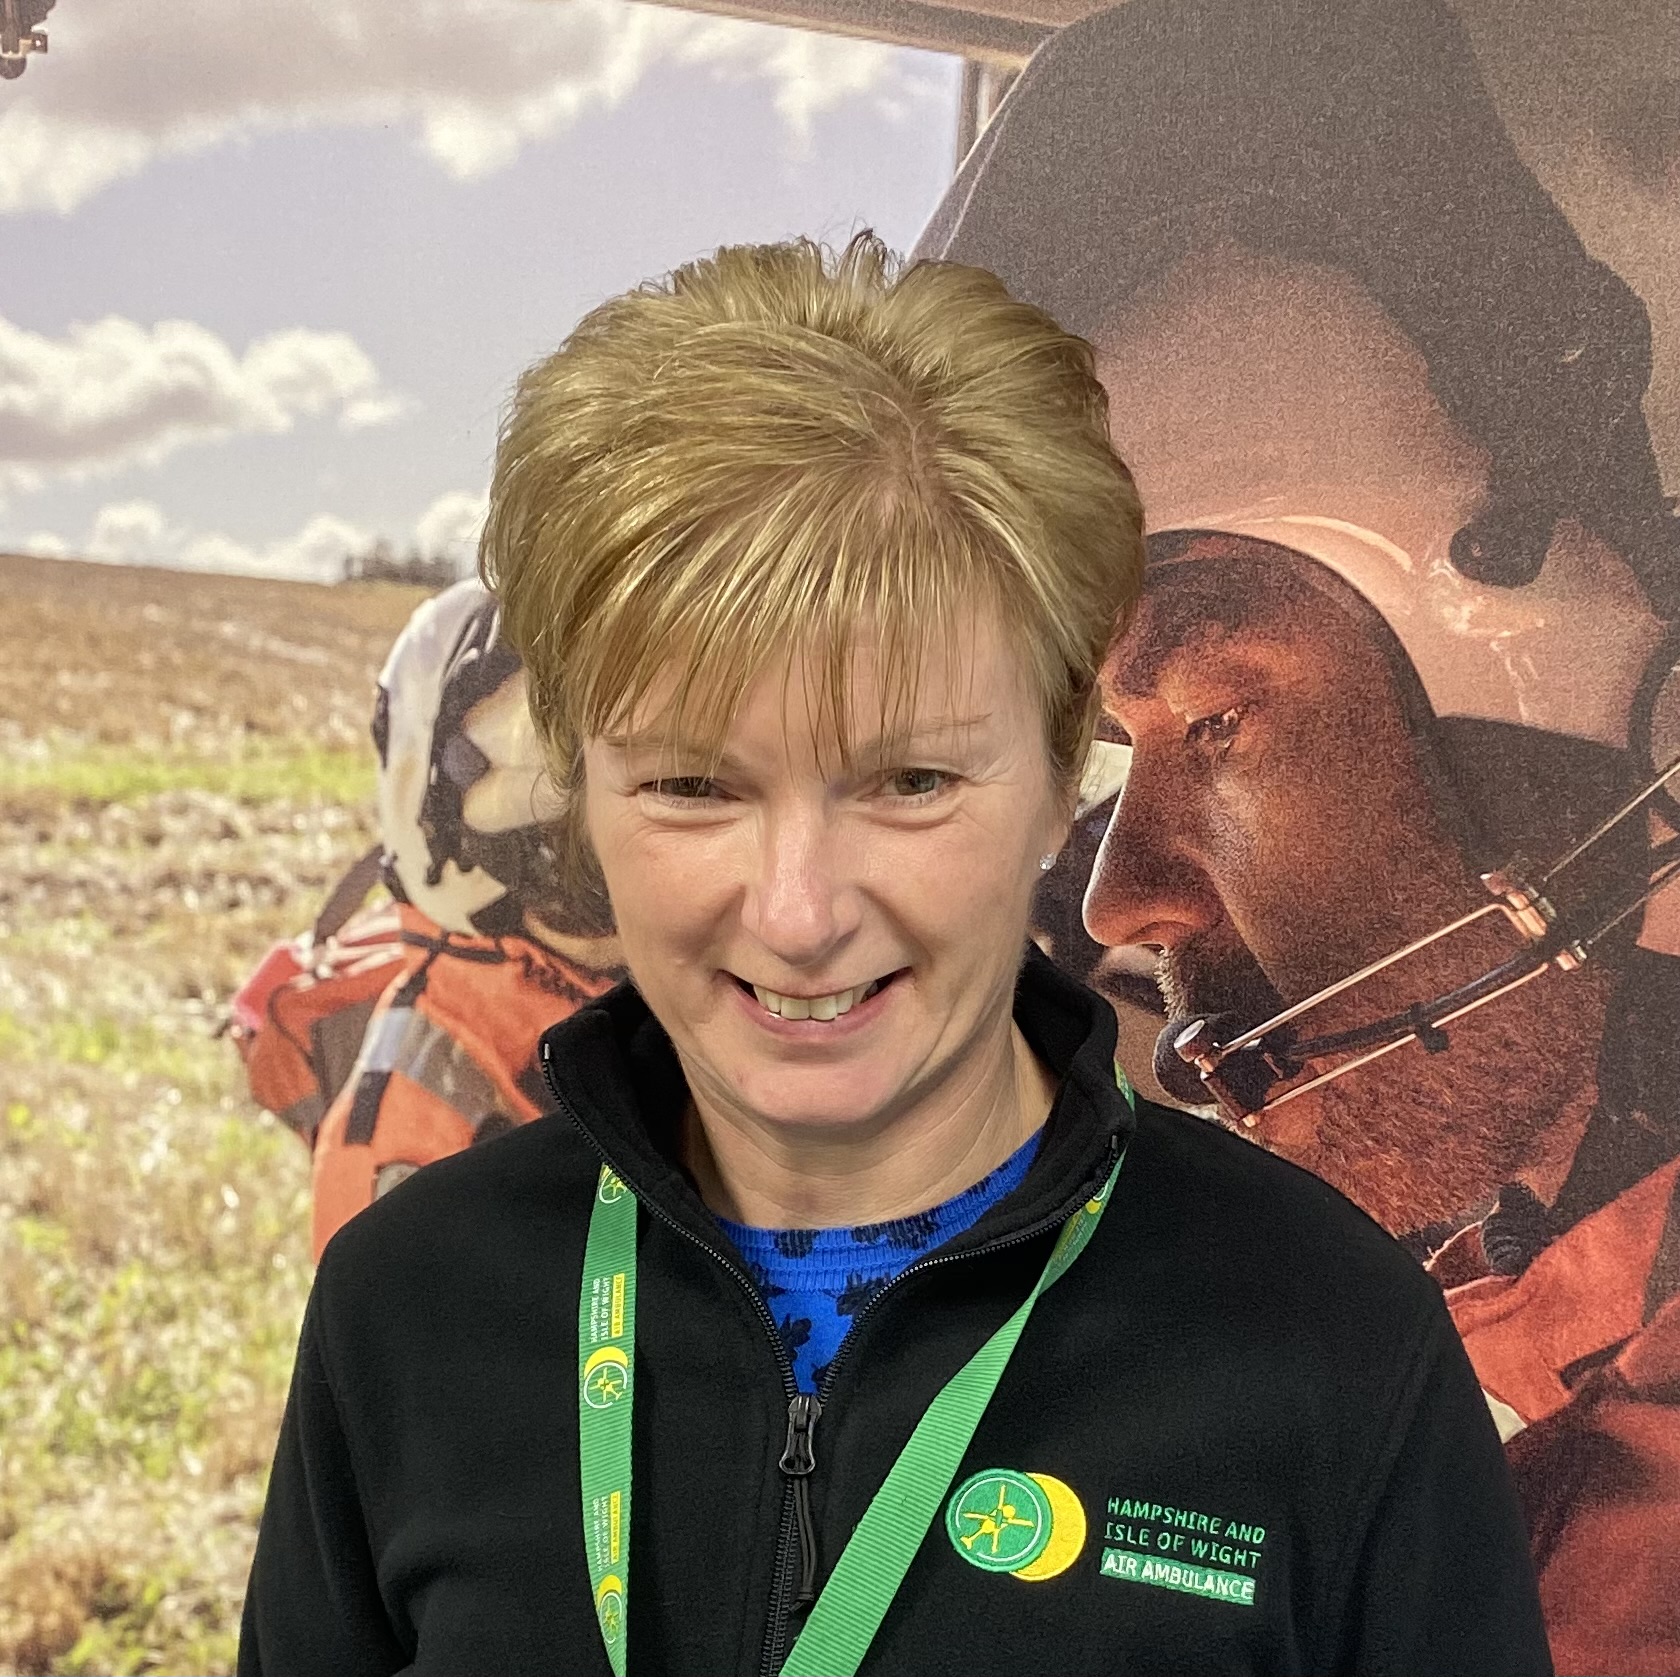 Lisa is wearing a HIOWAA fleece and lanyard and standing in front of a large canvas photo of the crew